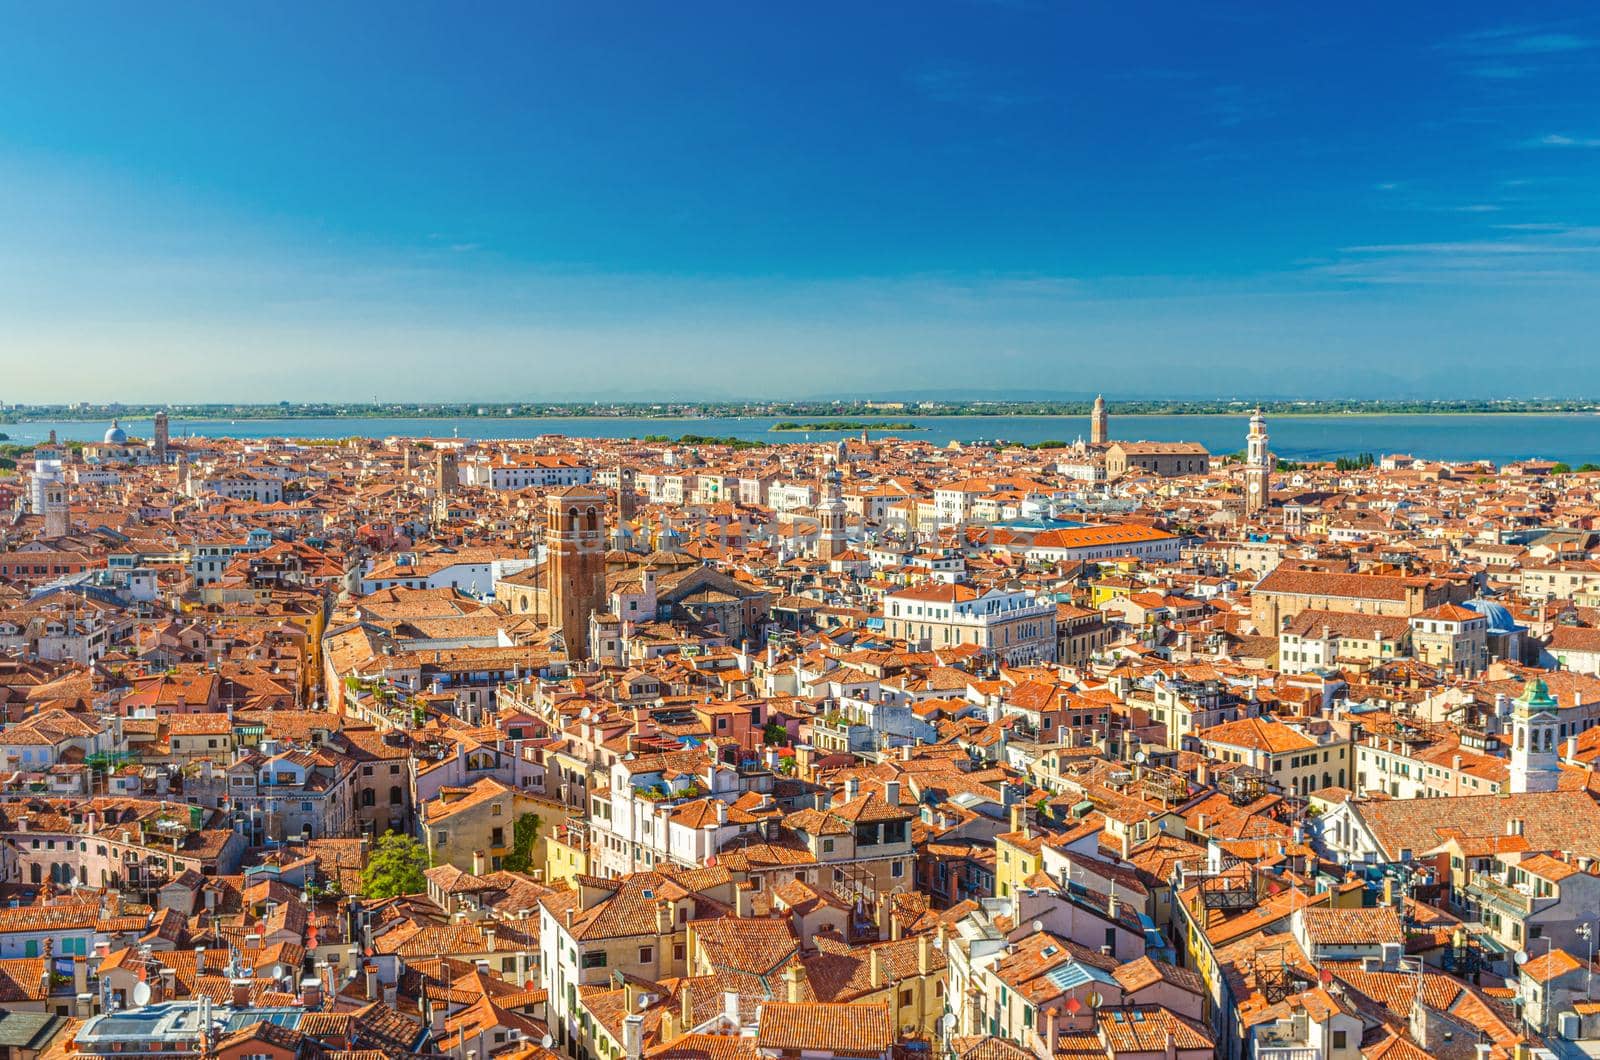 Aerial panoramic view of Venice city old historical centre, buildings with red tiled roofs, San Giuliano Mestre and blue sky background, Veneto Region, Northern Italy. Amazing Venice cityscape.